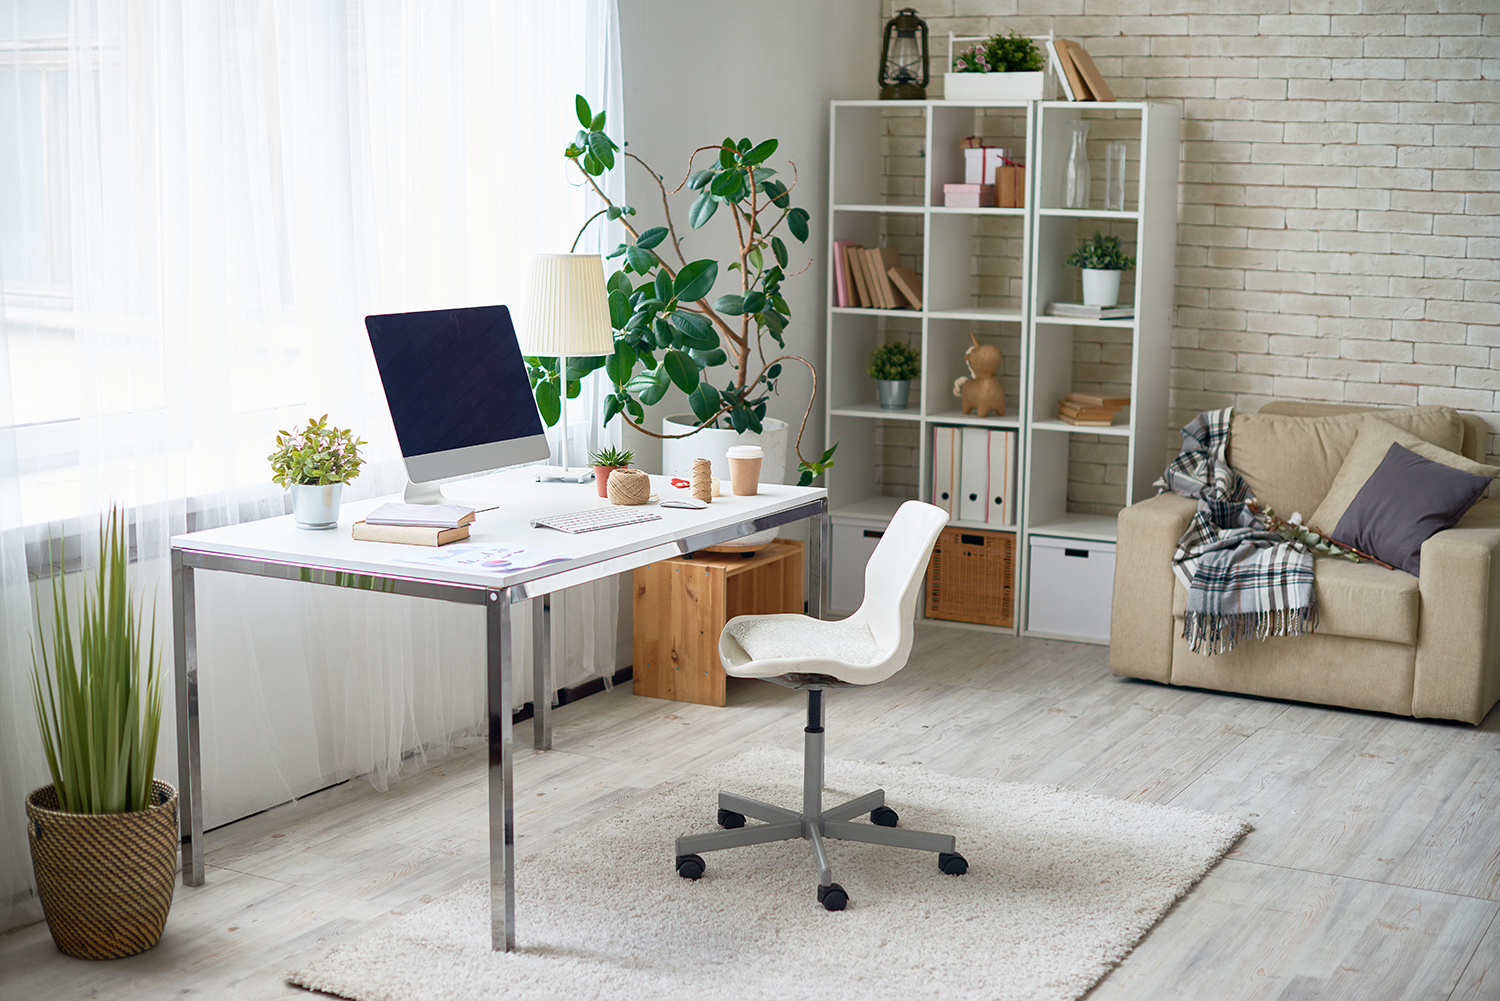 5 Quick Tips on Modernizing the Workplace and Your Home Office